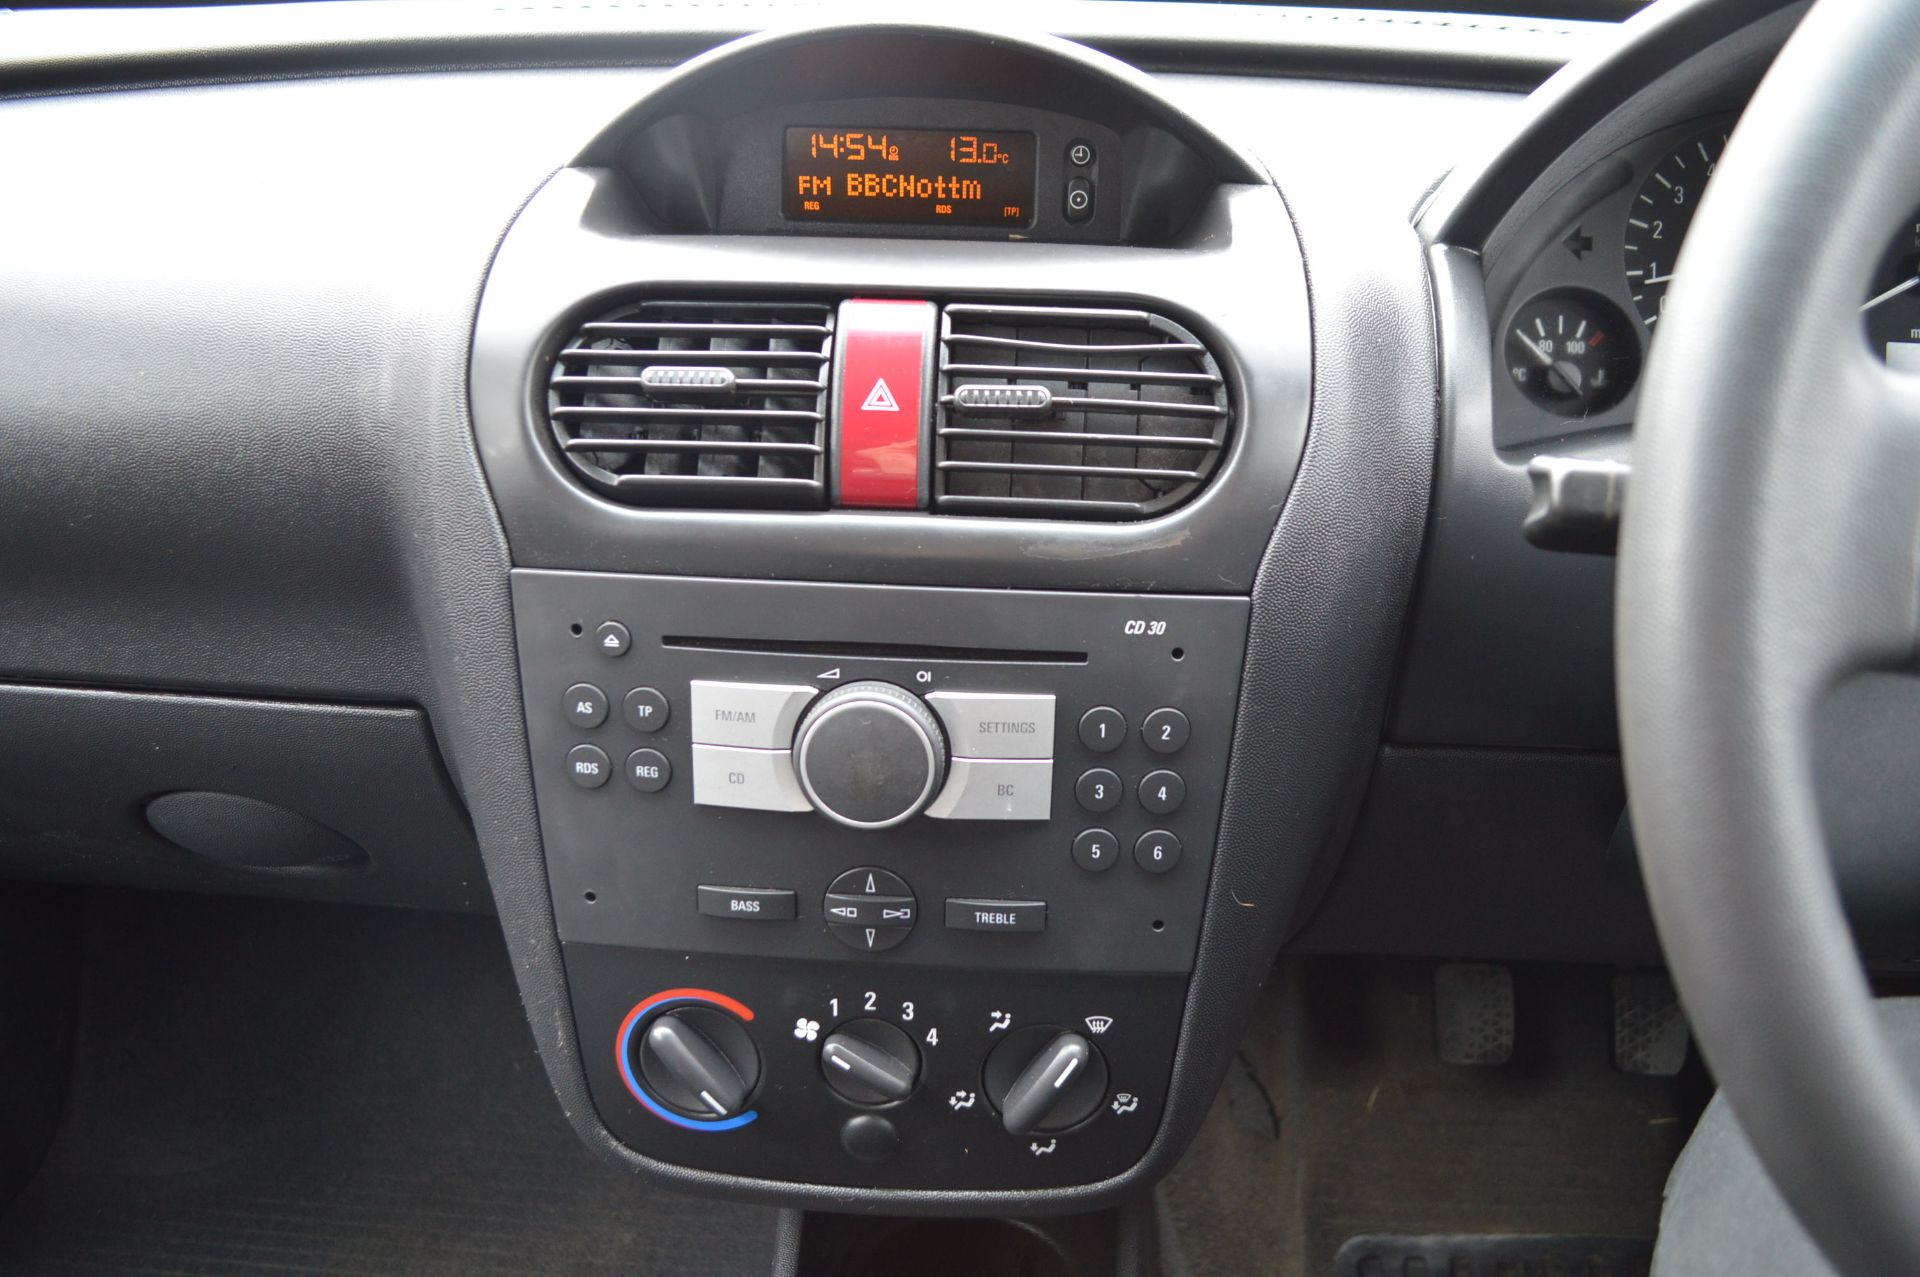 KB - 2007/07 REG VAUXHALL COMBO 2000 CDTI, SHOWING 1 OWNER   DATE OF REGISTRATION: 14TH MARCH 2007 - Image 14 of 17